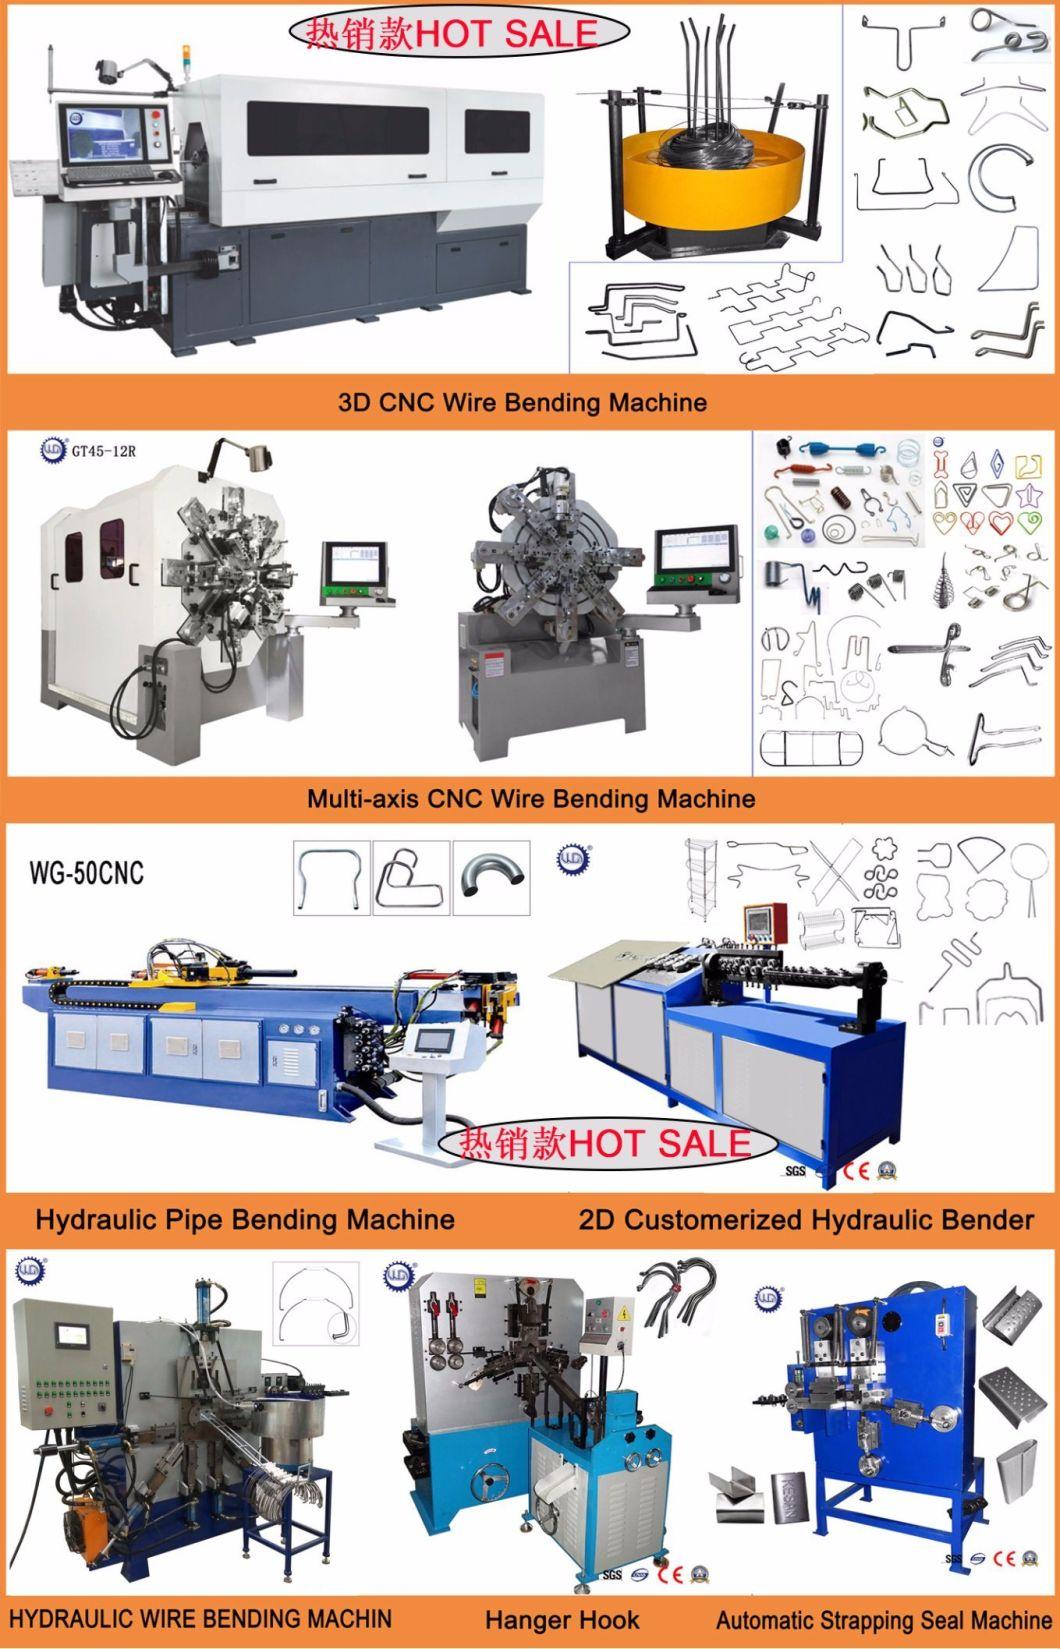 Automatic Hydraulic Metal Binder Clip Making Machine with Good Price